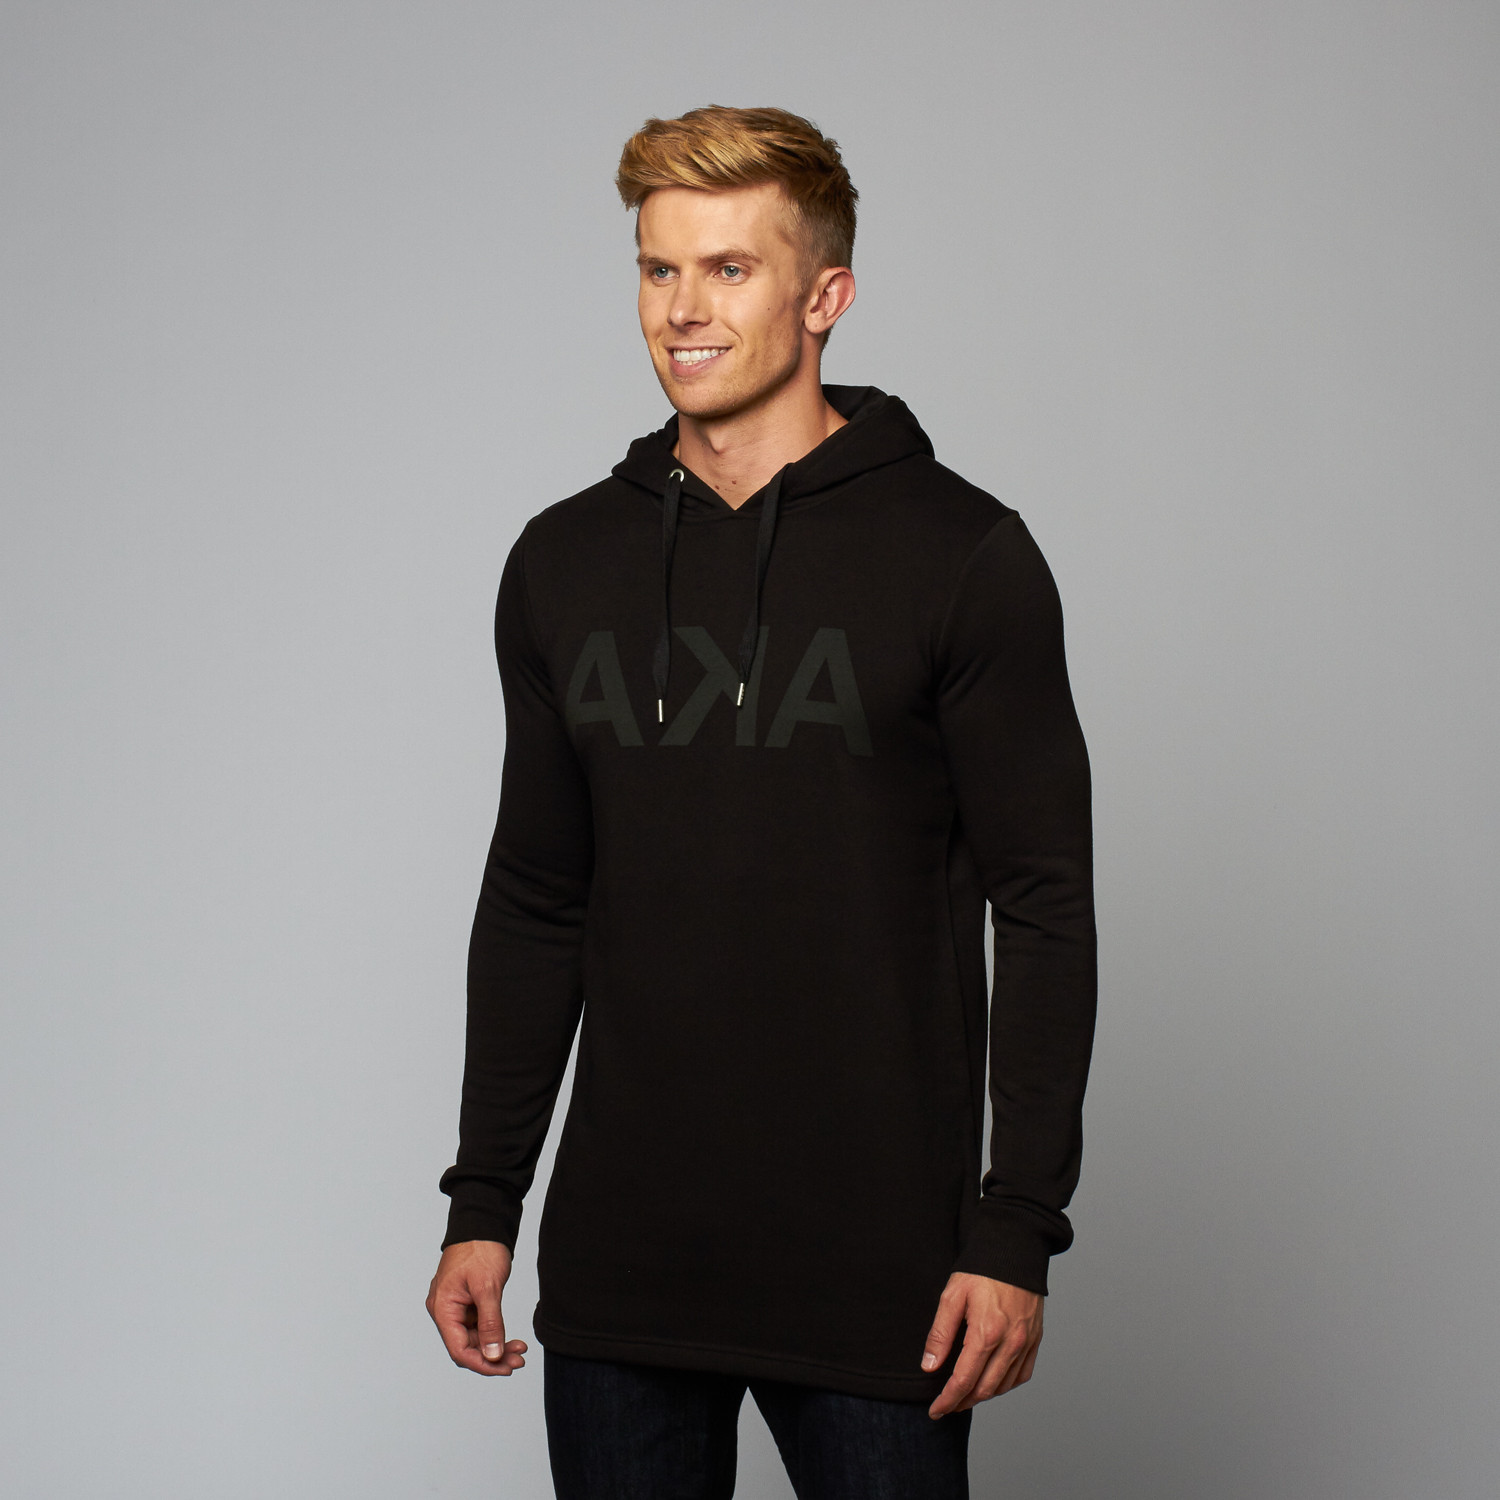 Fire Pullover Hooded Top // Black (XS) - AKA Clothing - Touch of Modern